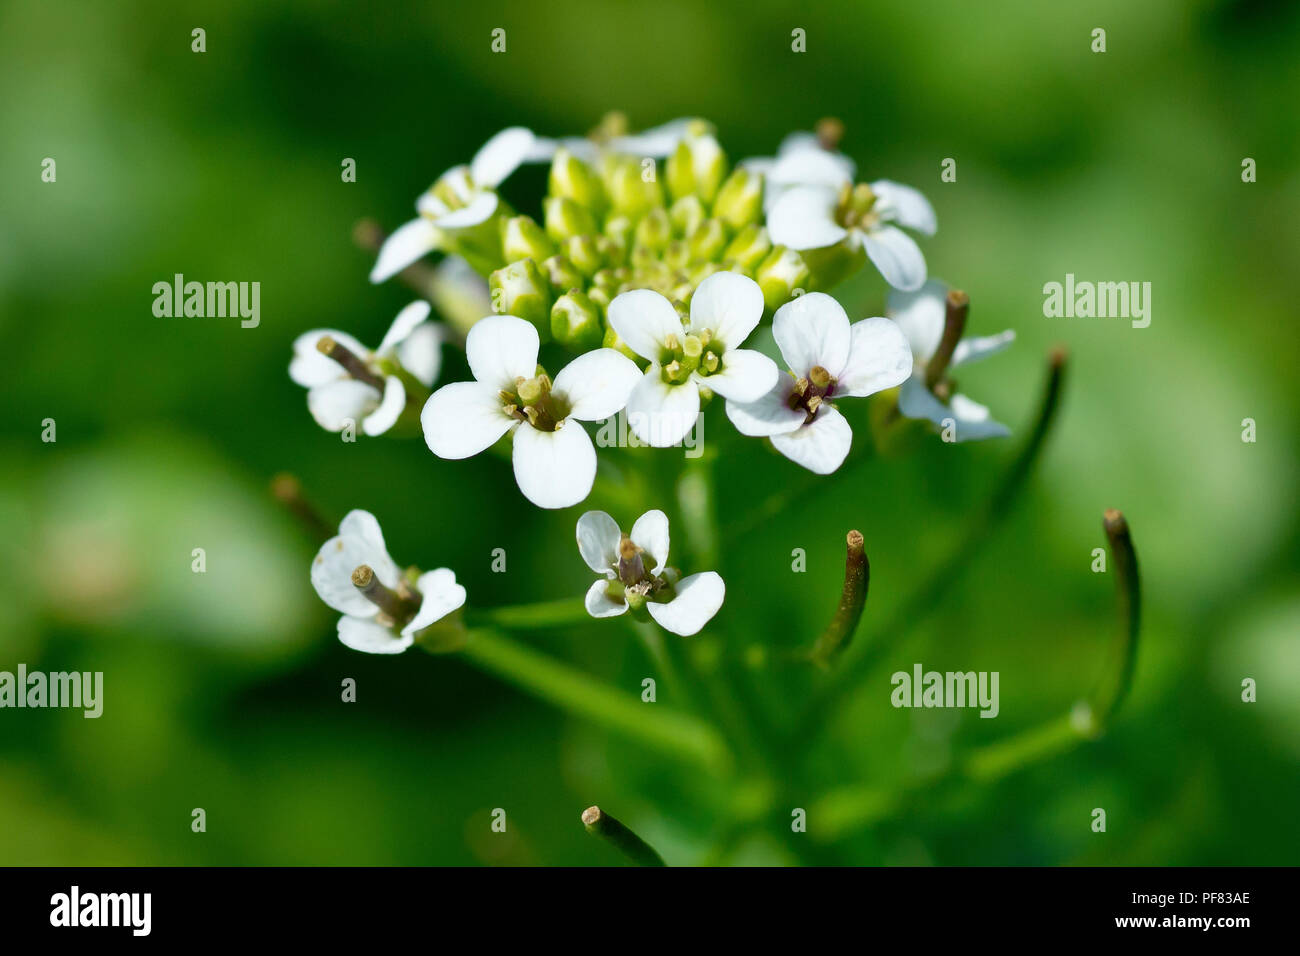 Watercress (nasturtium officinale), close up of a single flower head with developing seed pods. Stock Photo